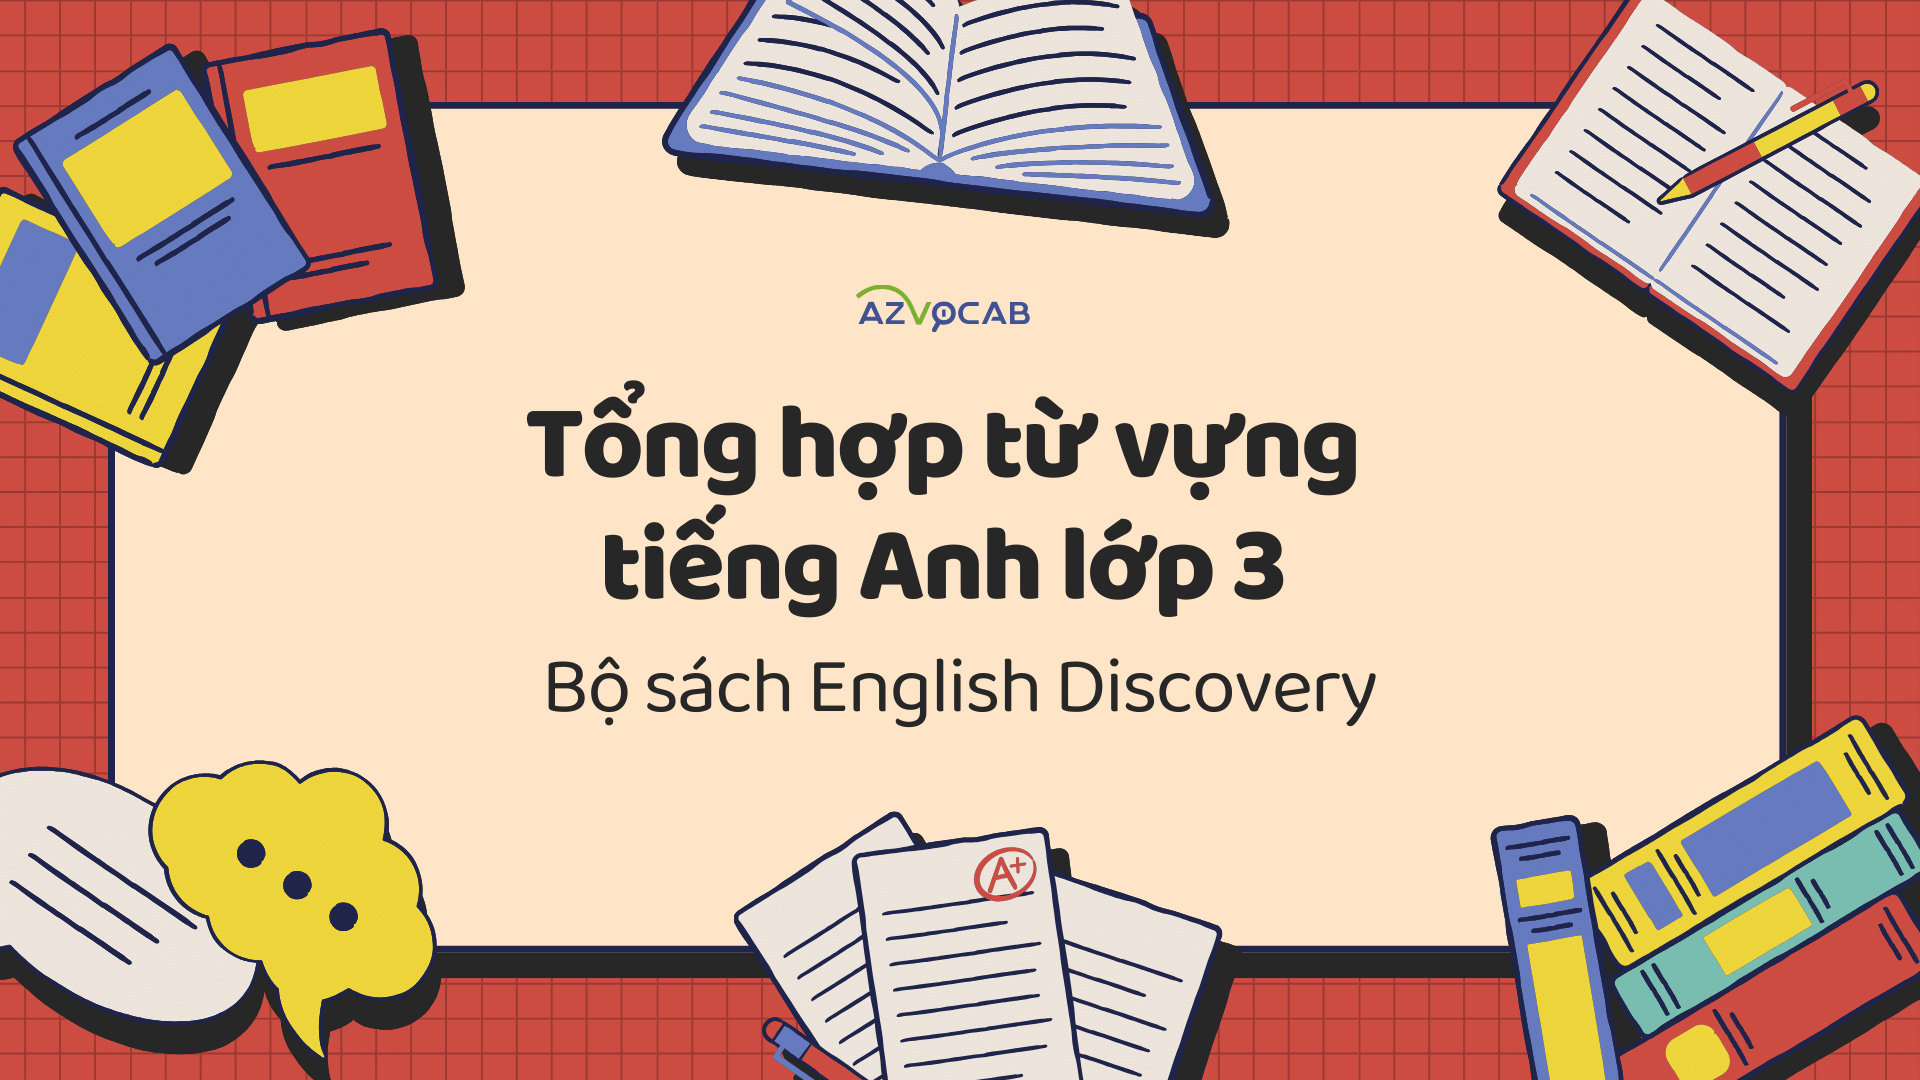 Tiếng Anh lớp 3 English Discovery